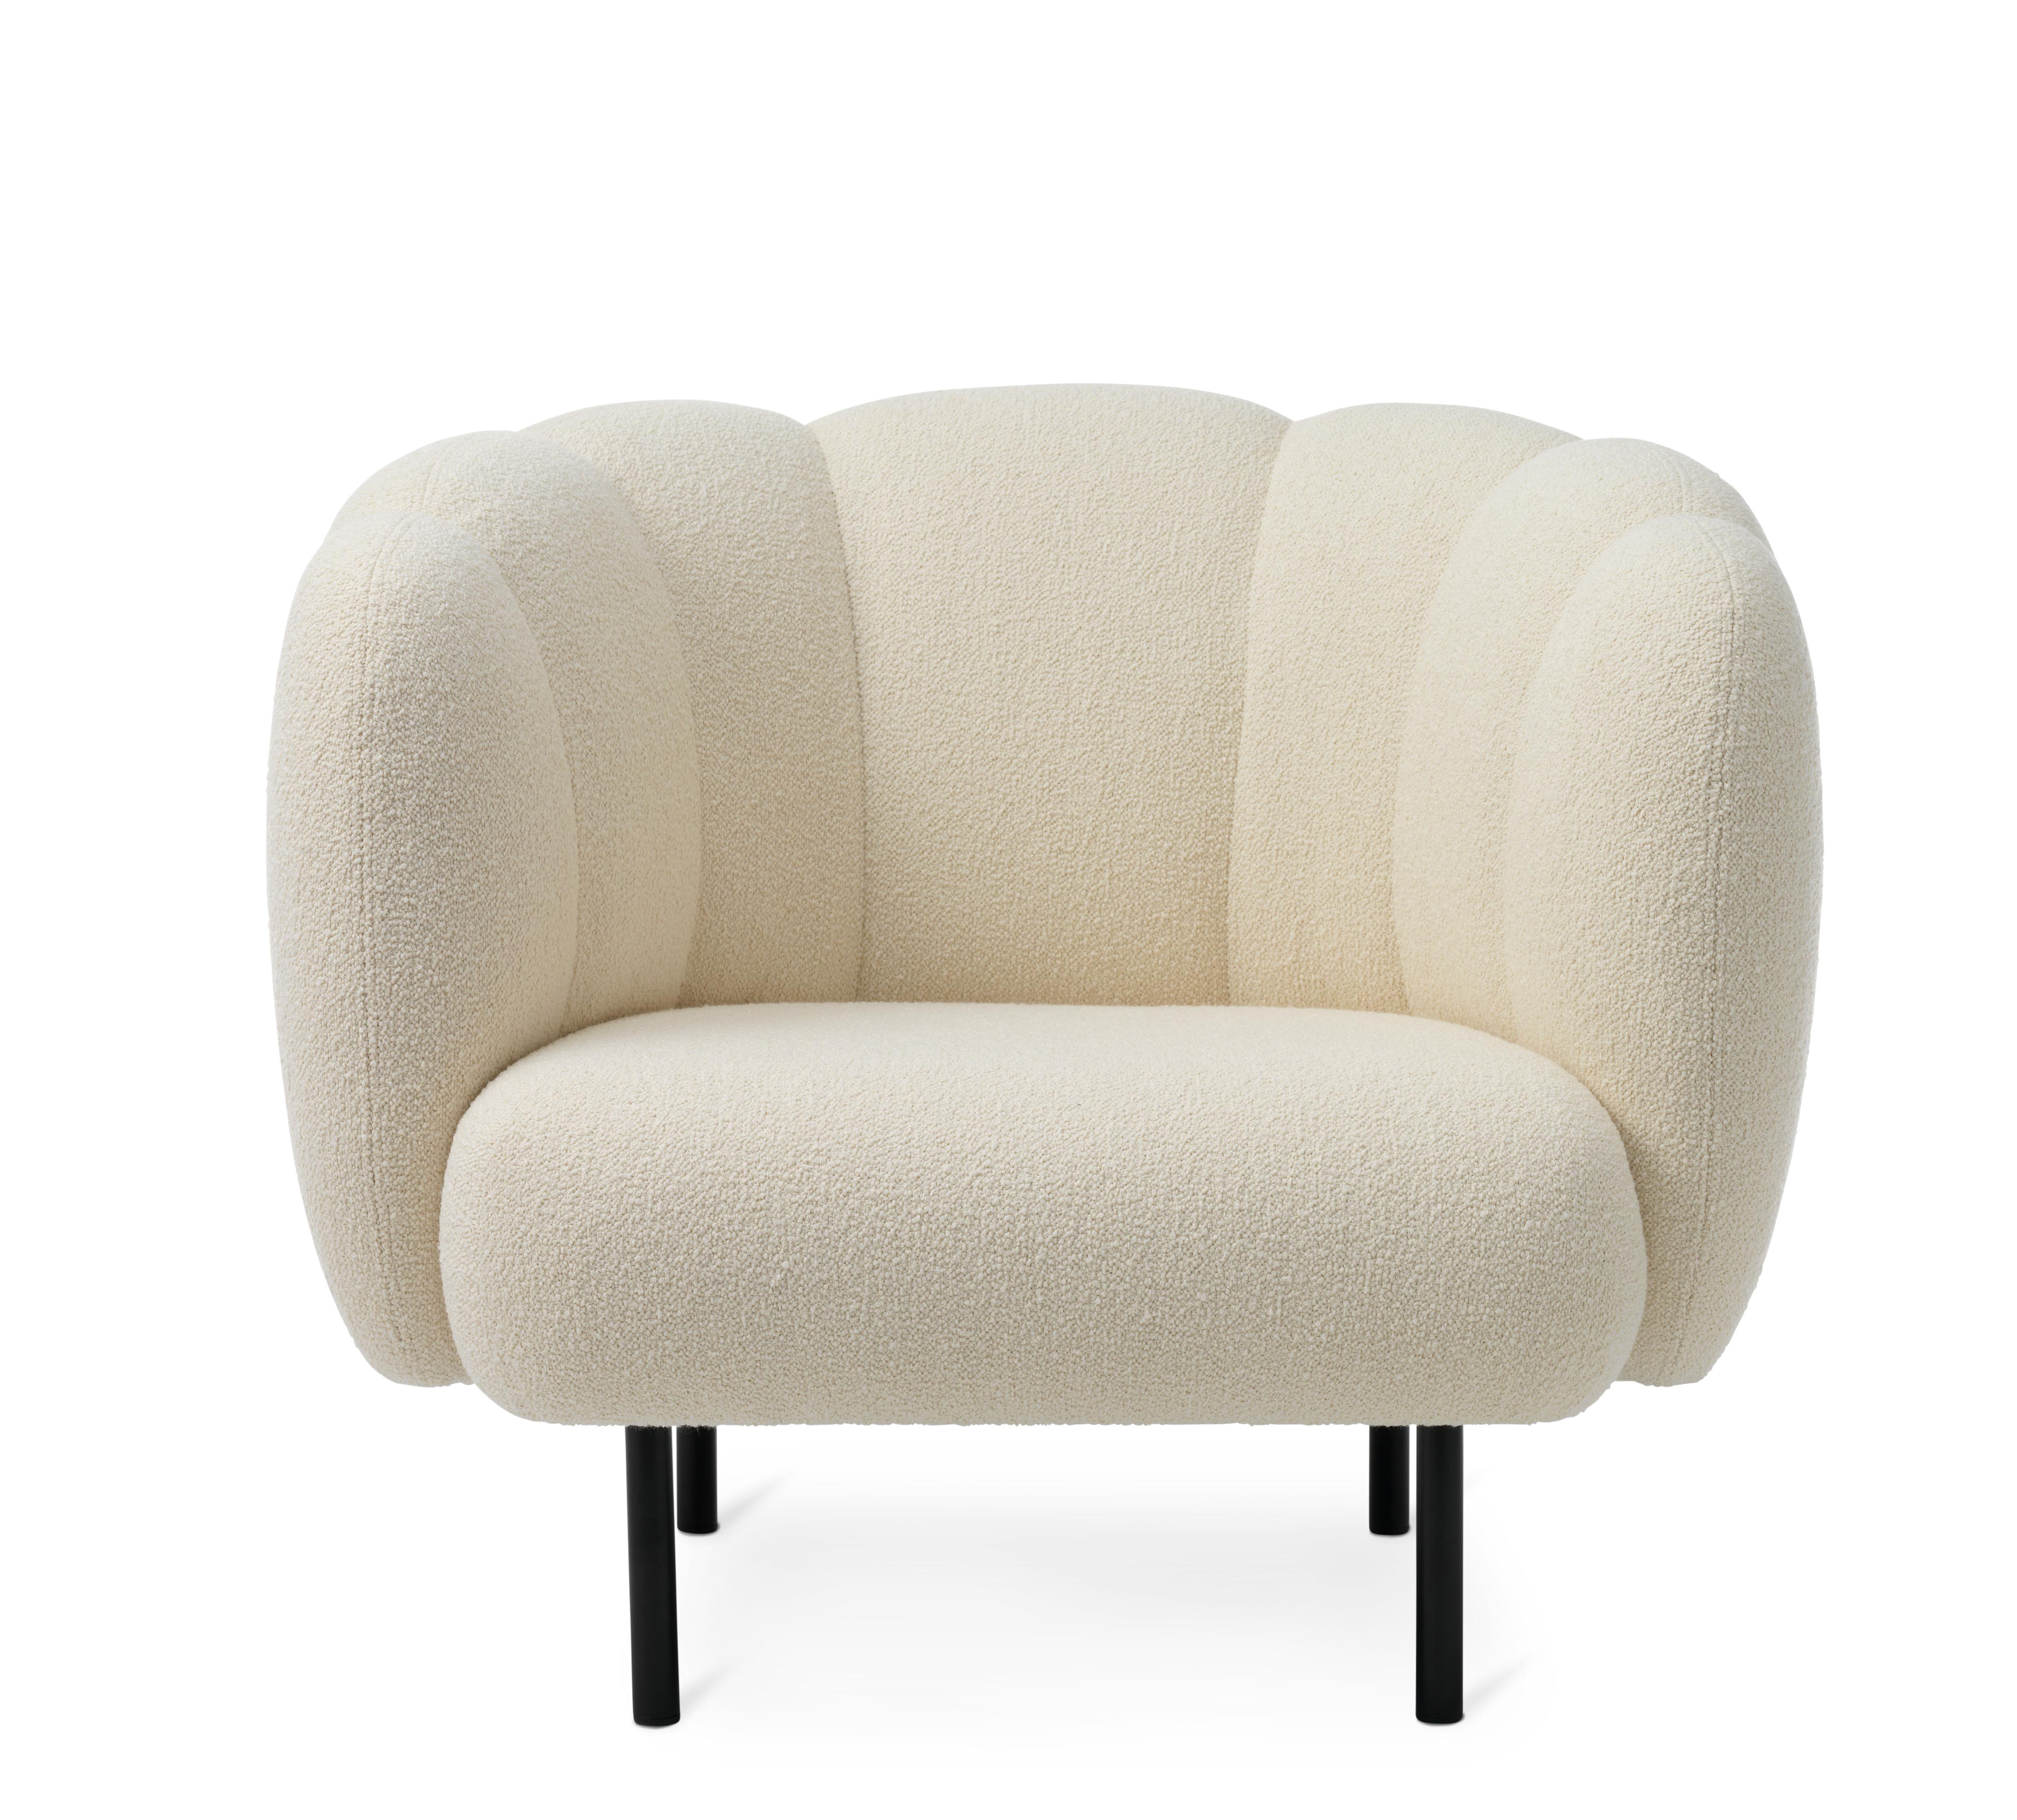 For Sale: White (Barnum 24) Cape Lounge Chair with Stitches, by Charlotte Høncke from Warm Nordic